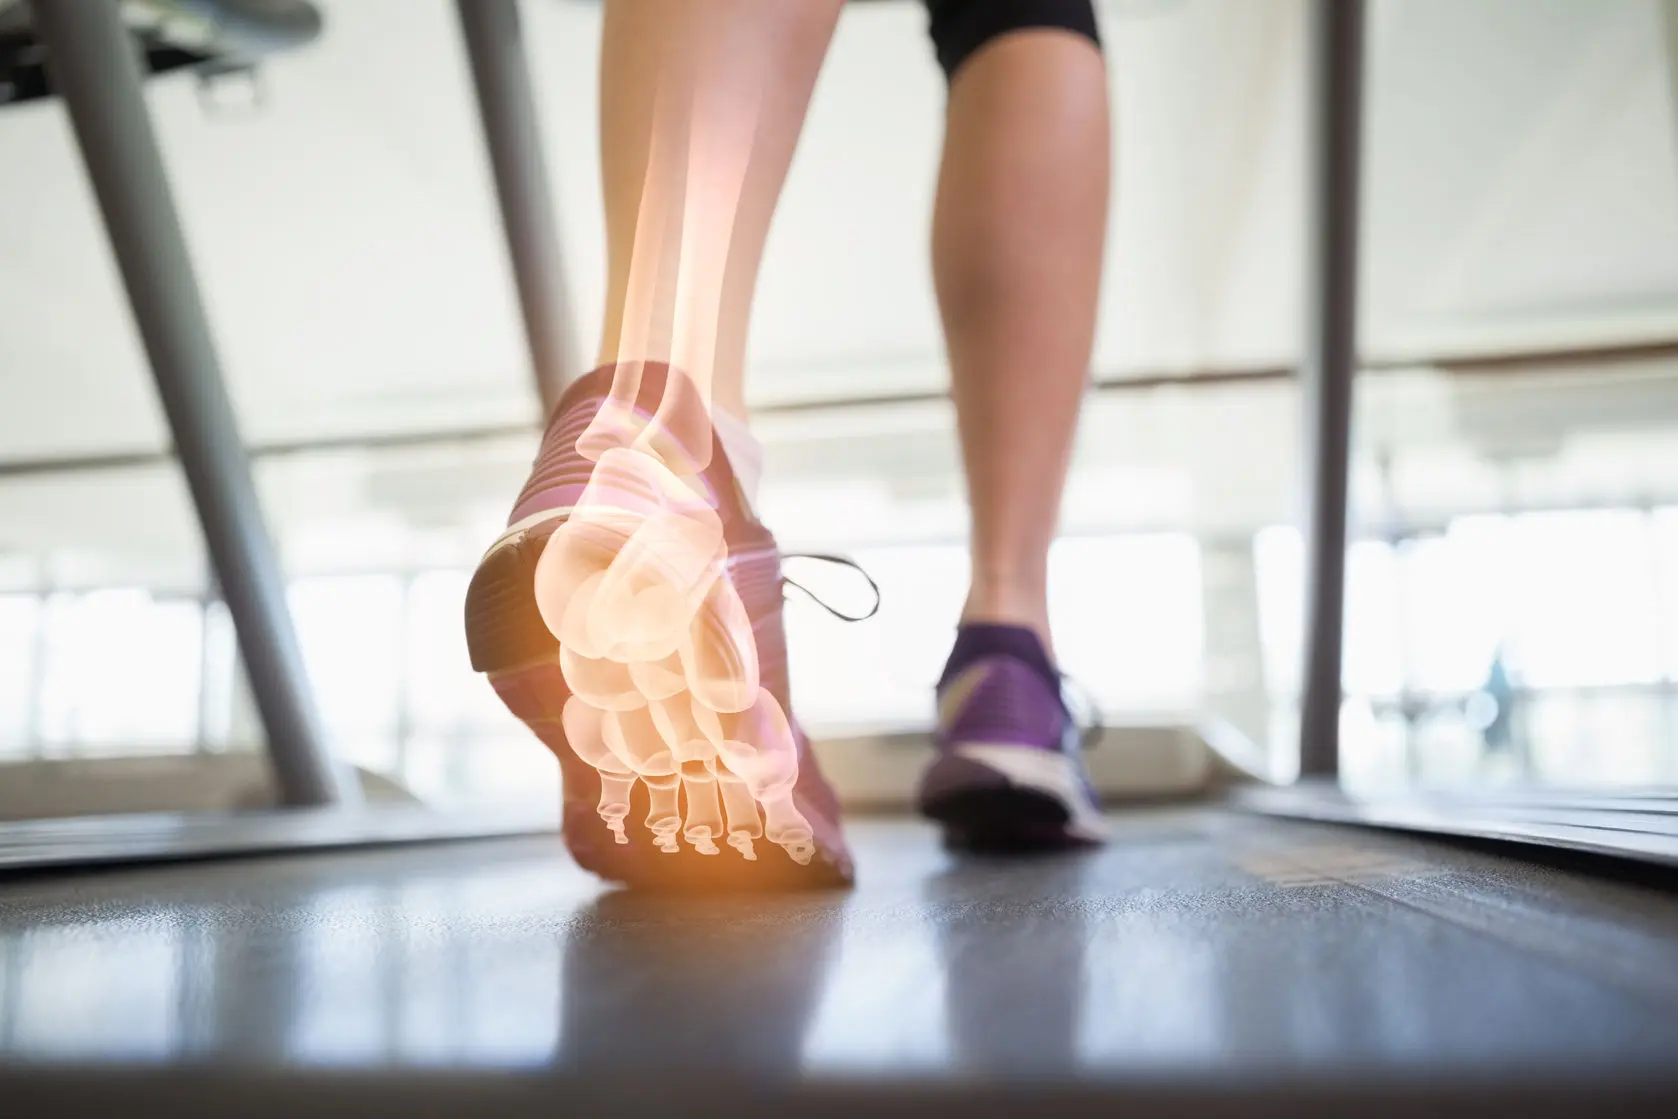 44790049 - digital composite of highlighted foot bones of jogging woman